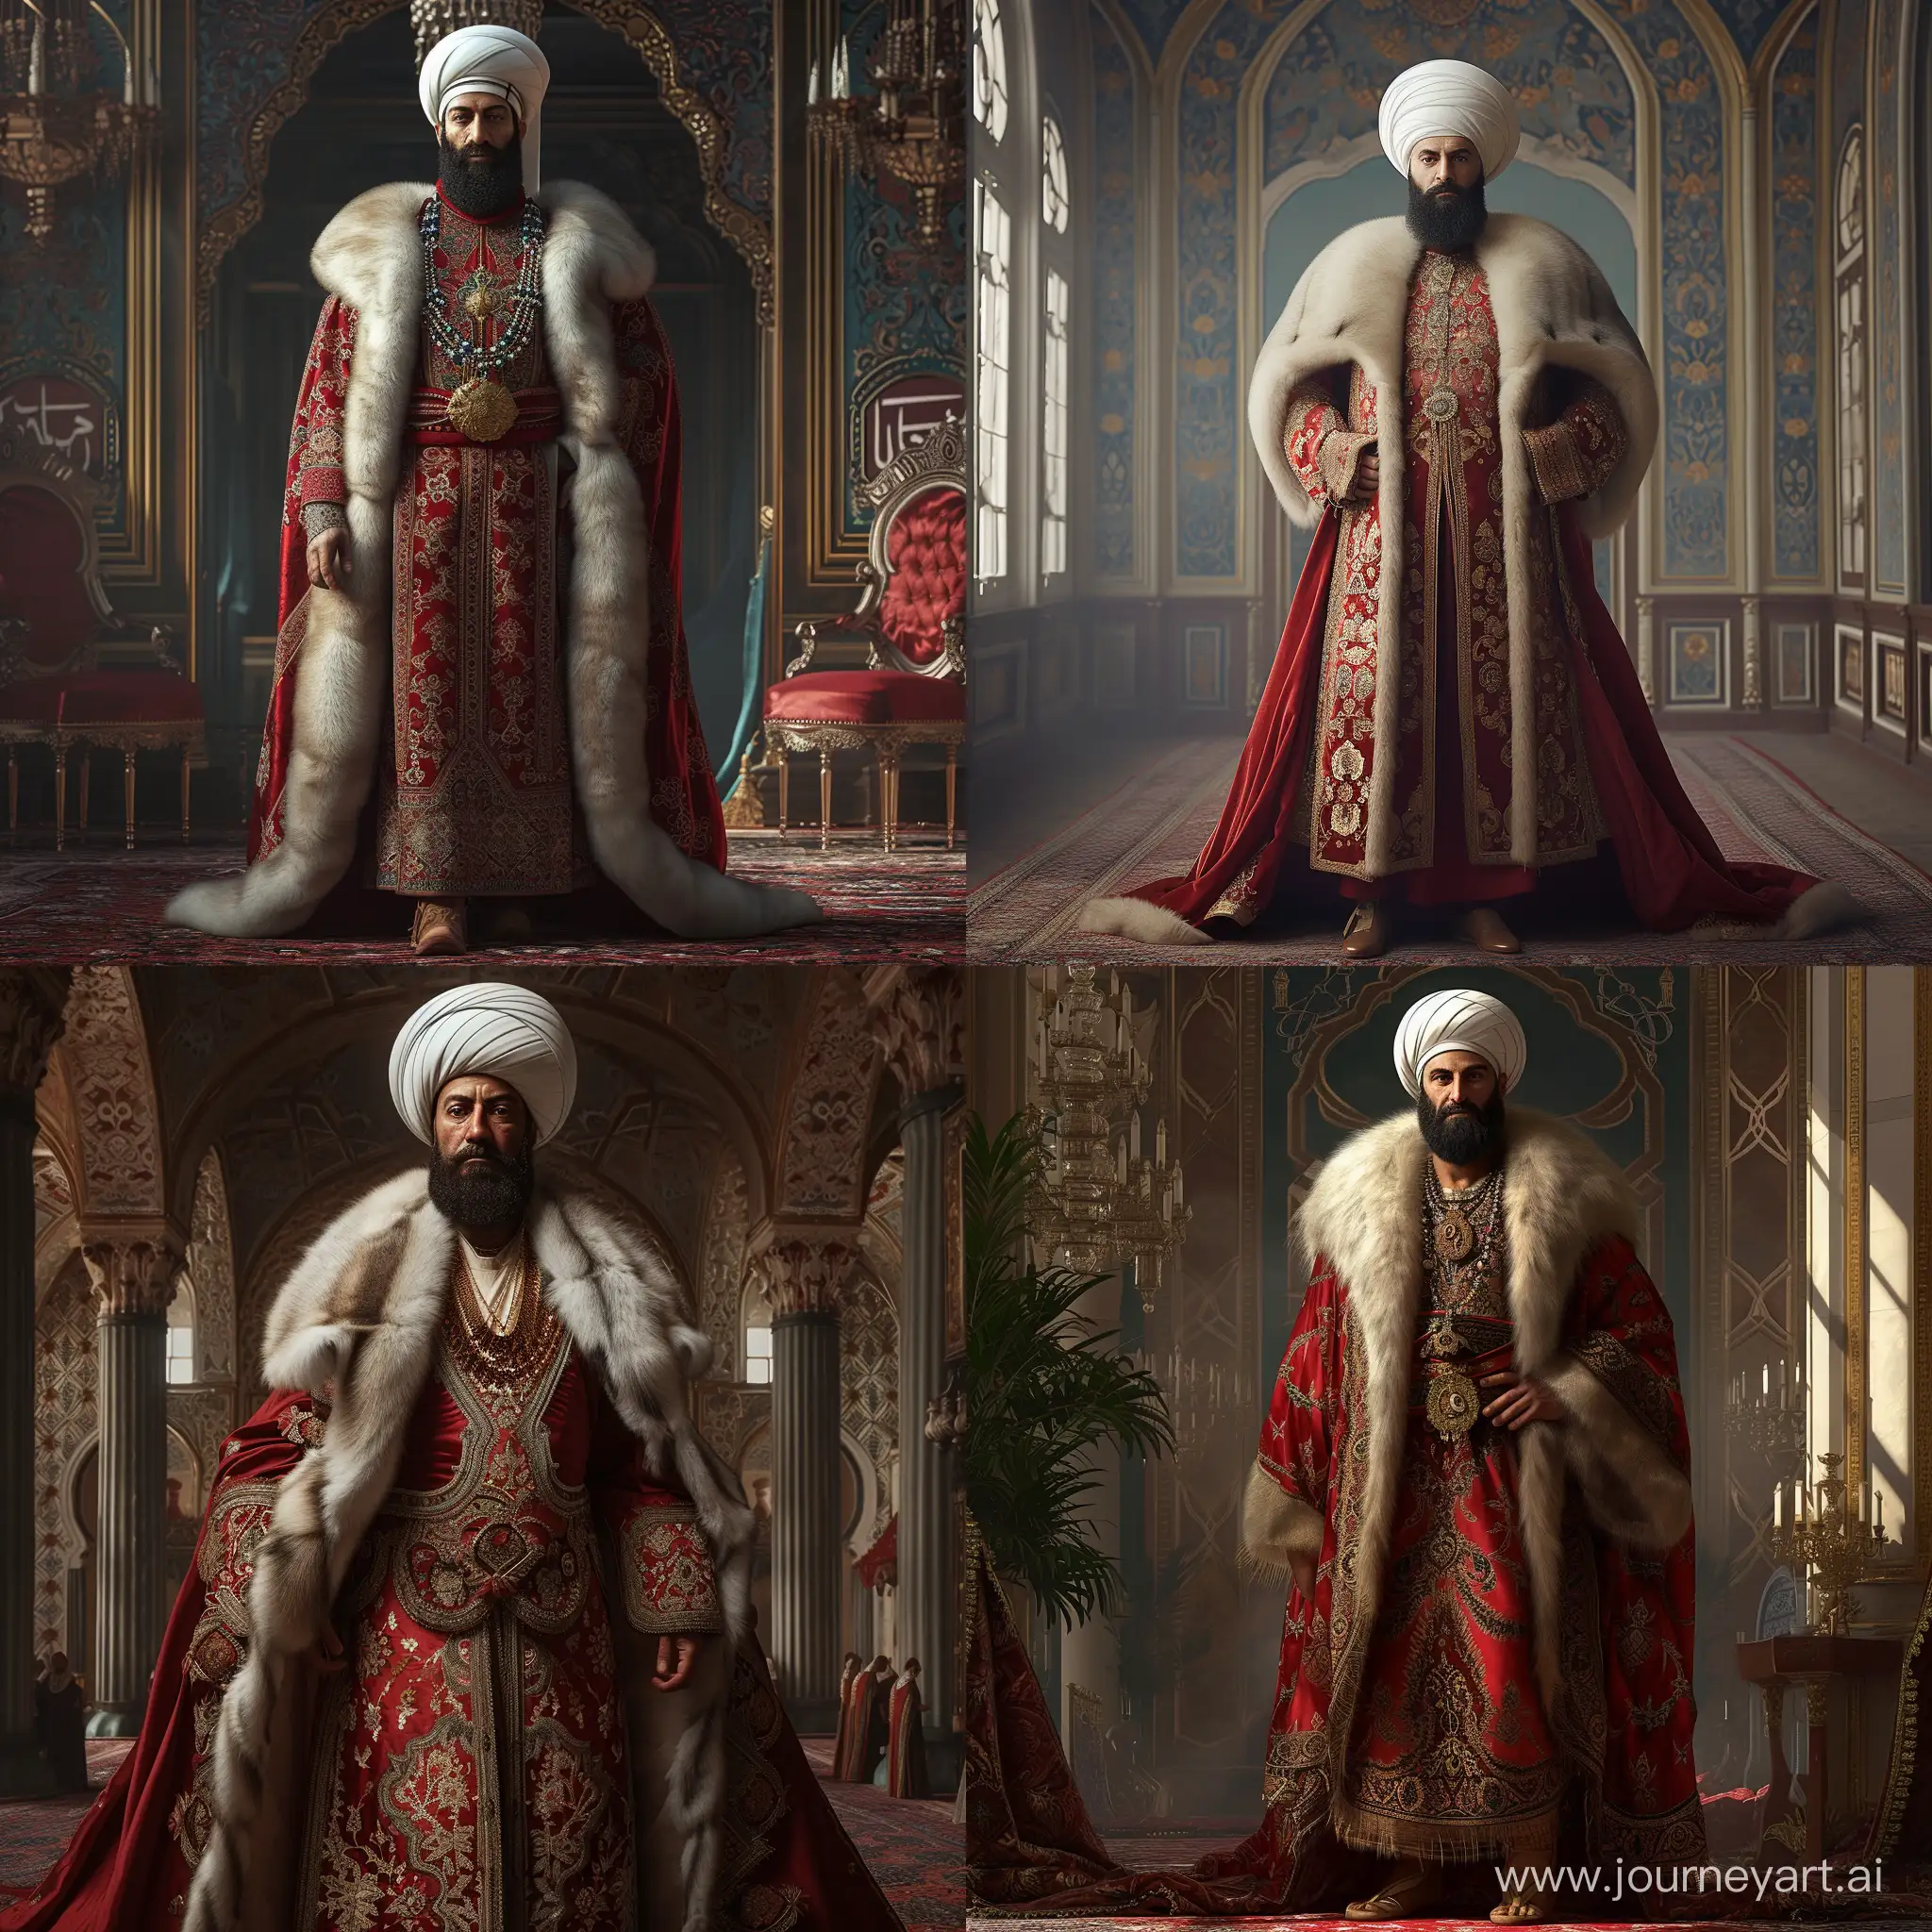 24 years old Ottoman Sultan (Mehmed II) standing tall in ottoman palace, ottoman genetics, ottoman nose, full average beard, big white ottoman turban and red silk caftan with fur collars, islamic motifs, high quality, realistic image